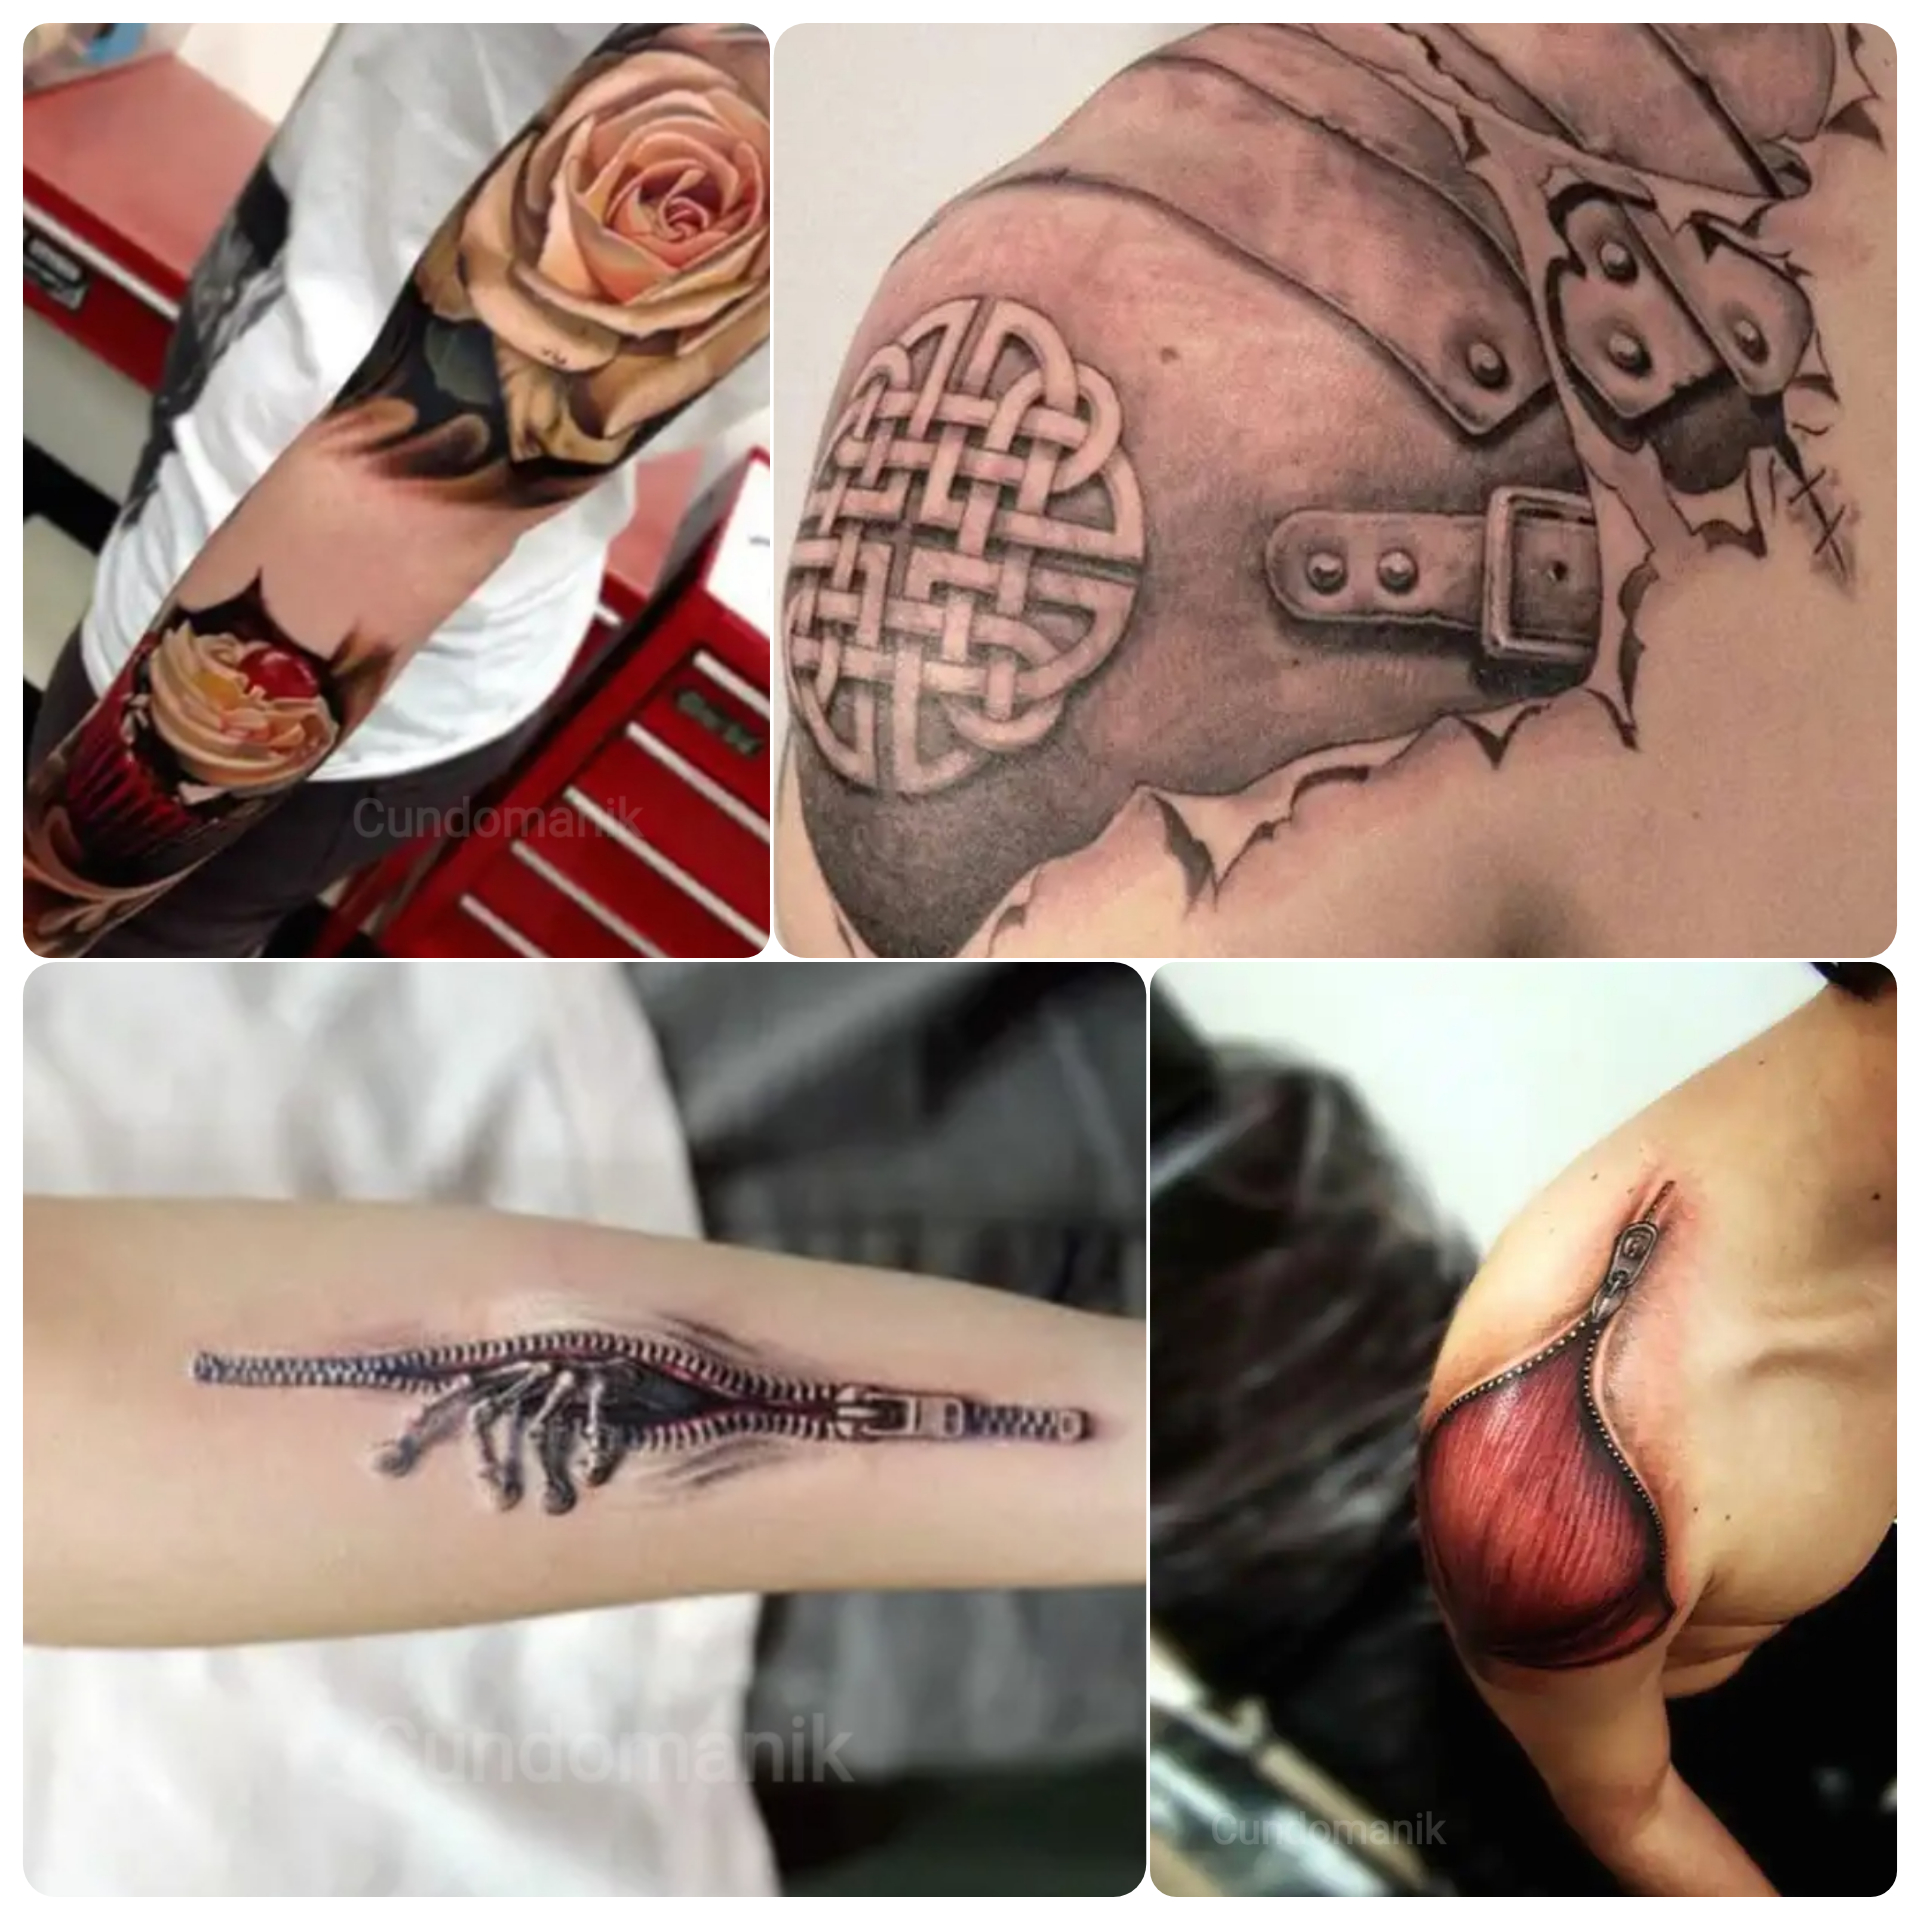 The best coolest tattoos for men and women